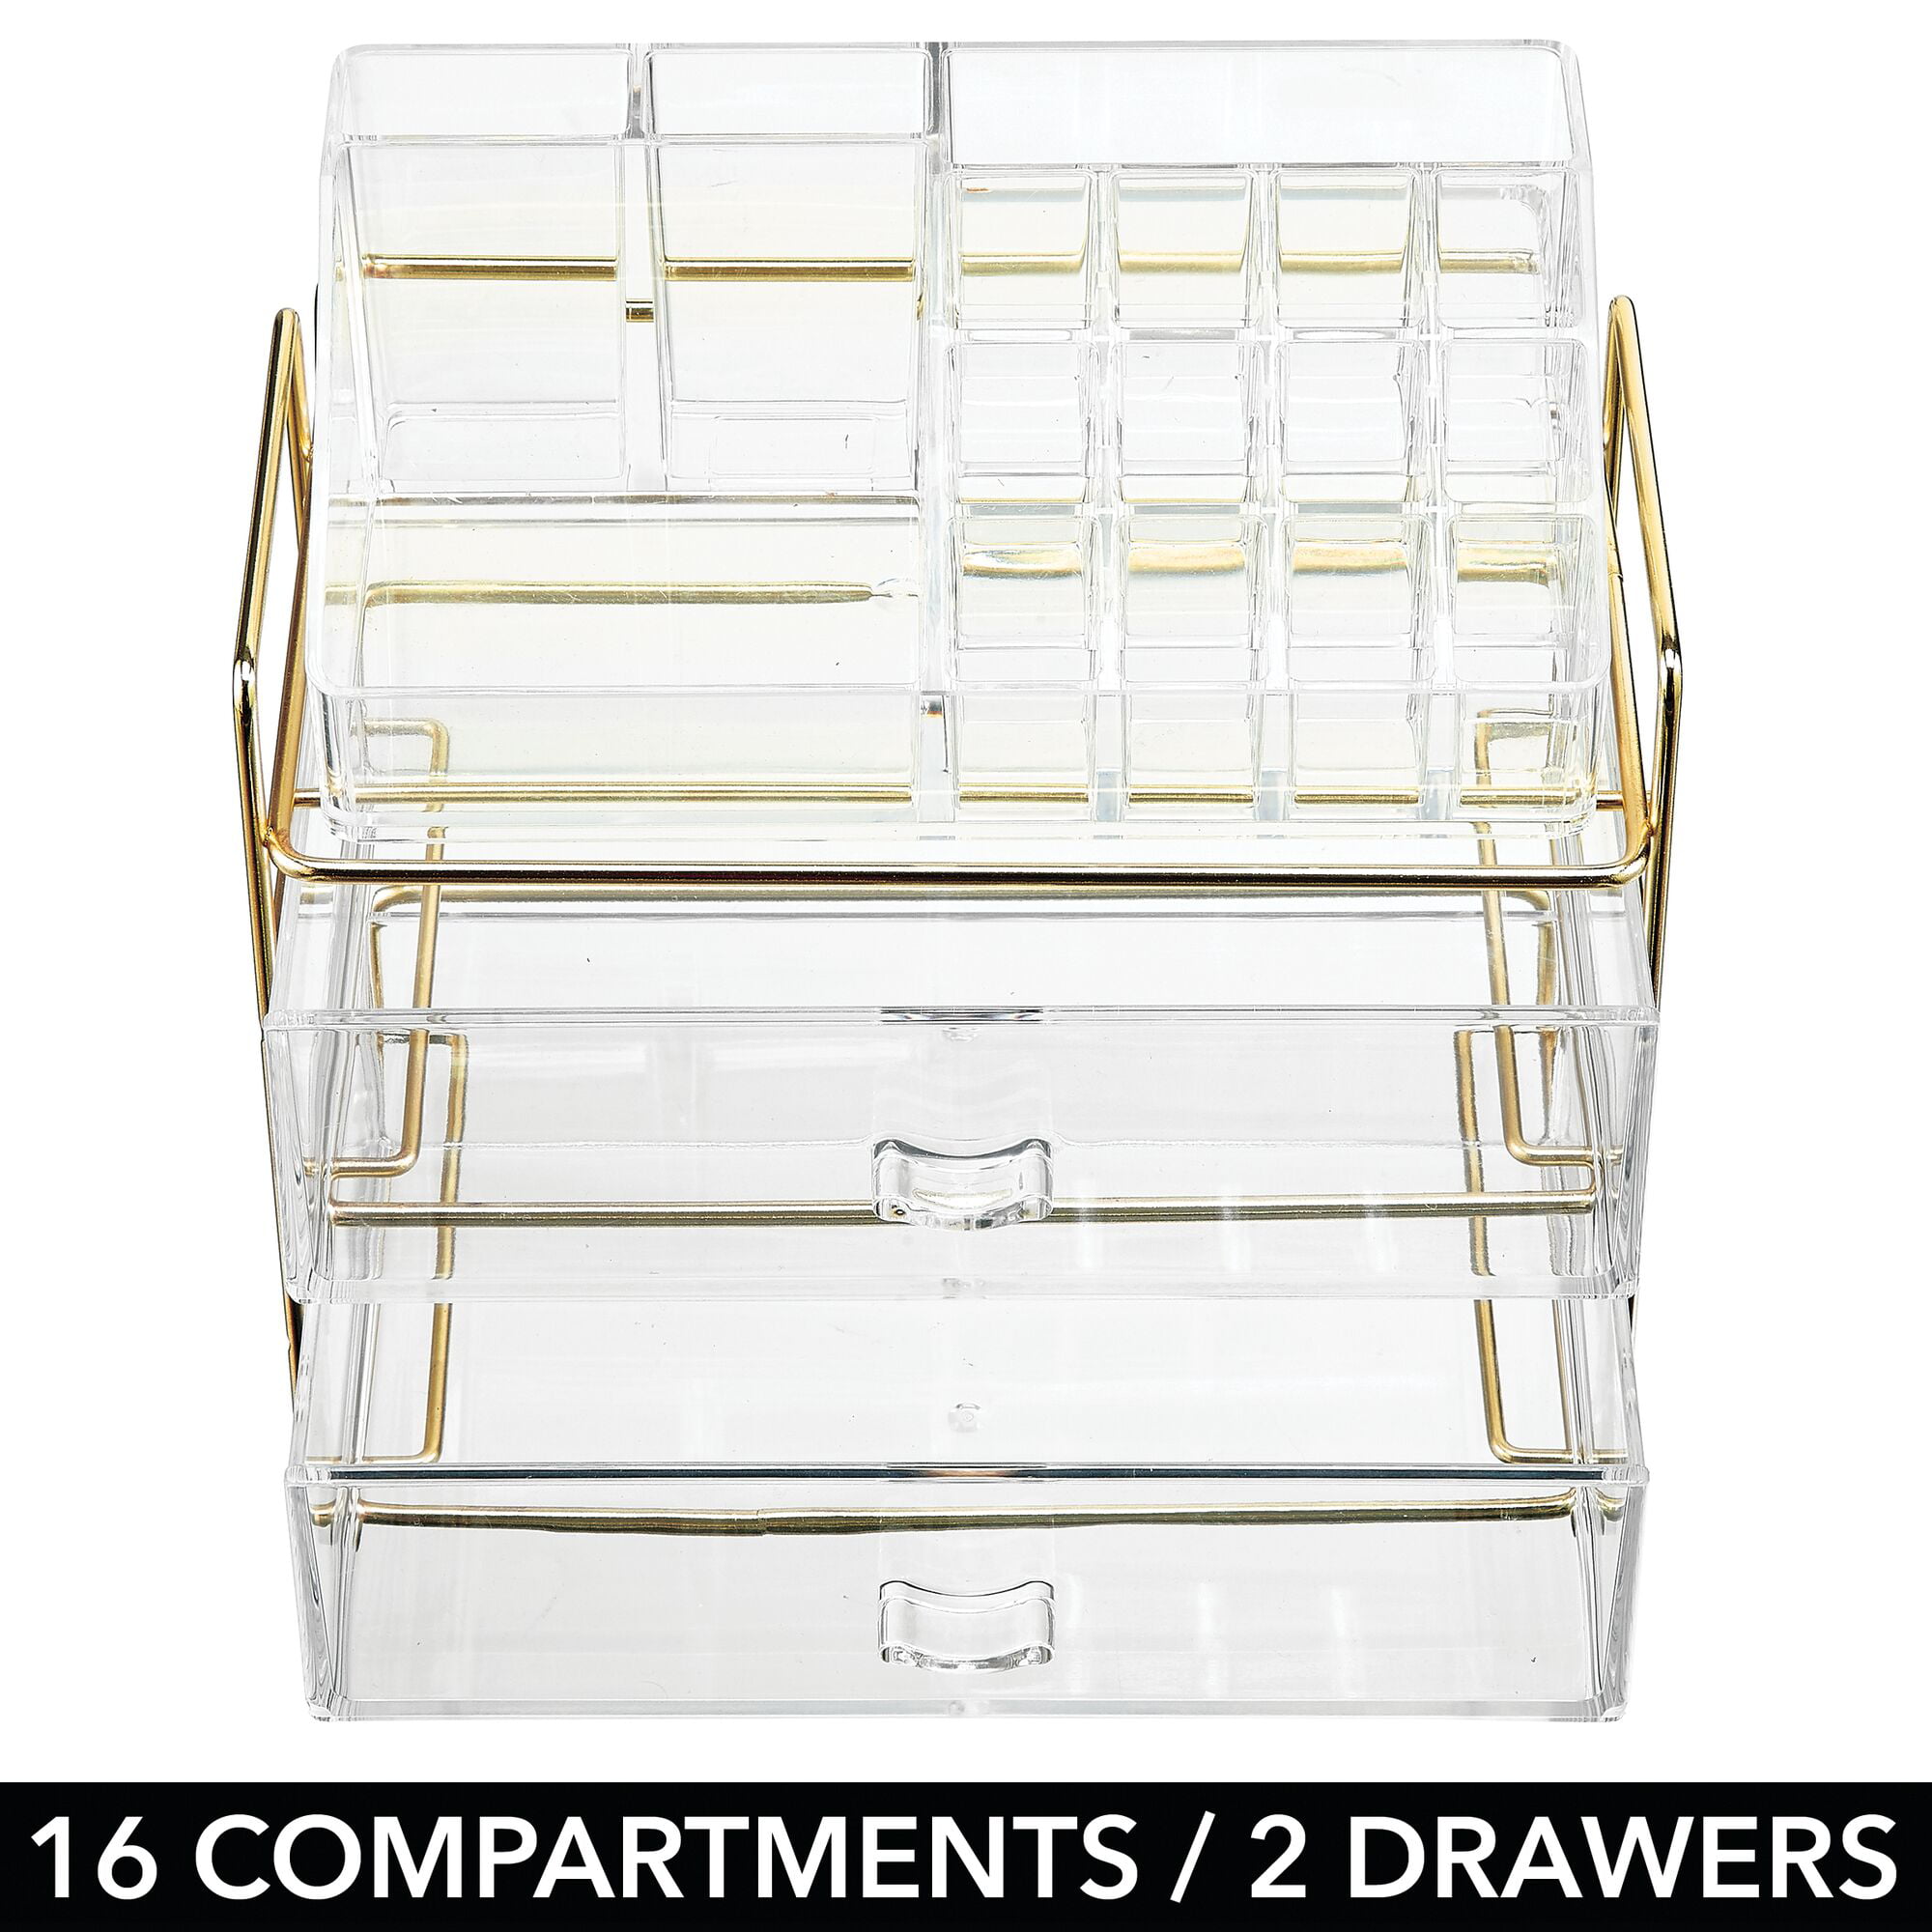 Mdesign 16-section Plastic Cosmetic Storage Organizer Makeup Caddy - 2  Drawers, 6 X 9.5 X 13, Rose Gold/clear : Target